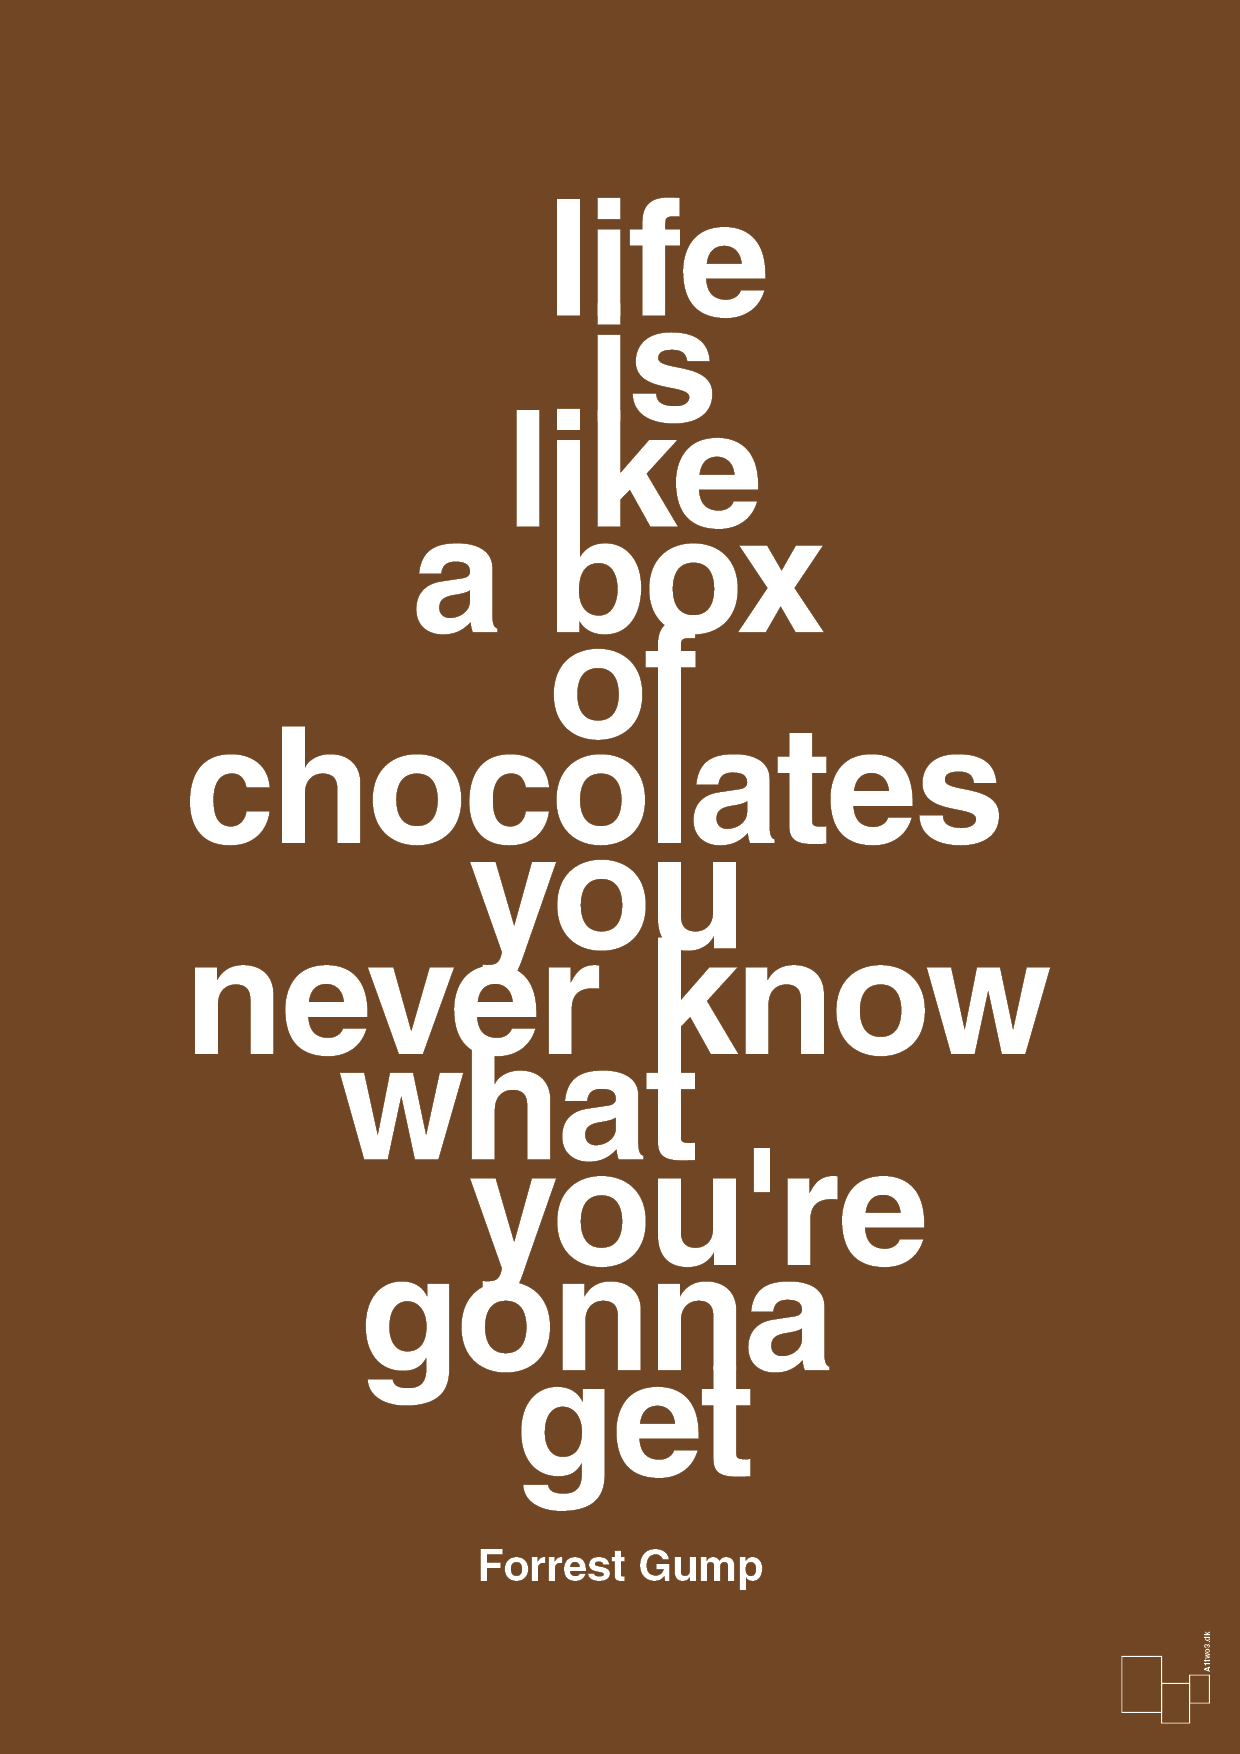 life is like a box of chocolates you never know what you're gonna get - Plakat med Citater i Dark Brown